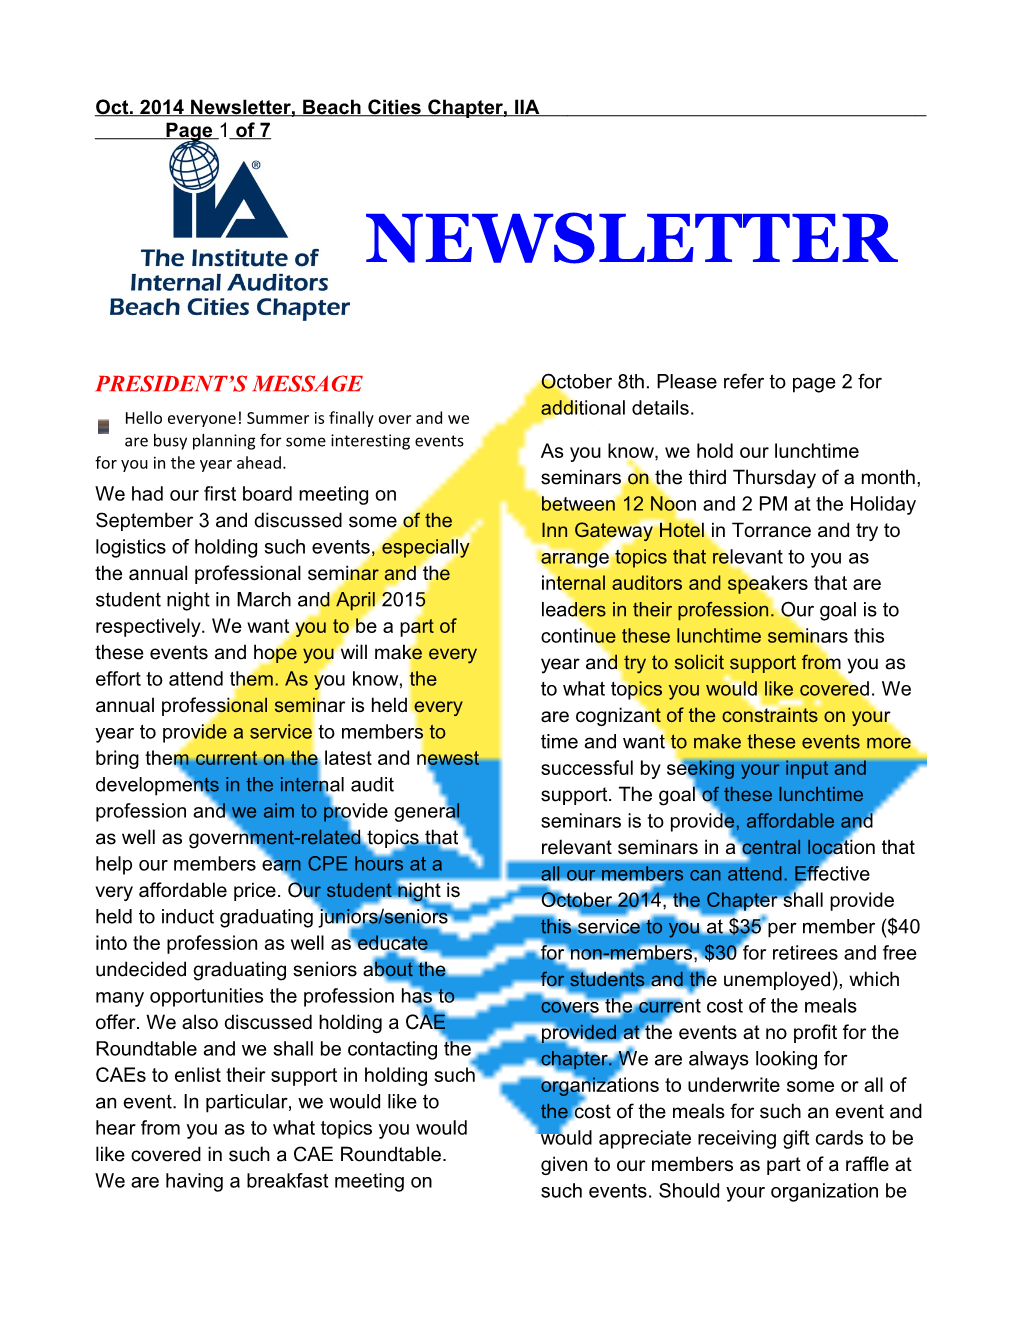 Oct.2014 Newsletter, Beach Cities Chapter, IIA Page 1 Of7